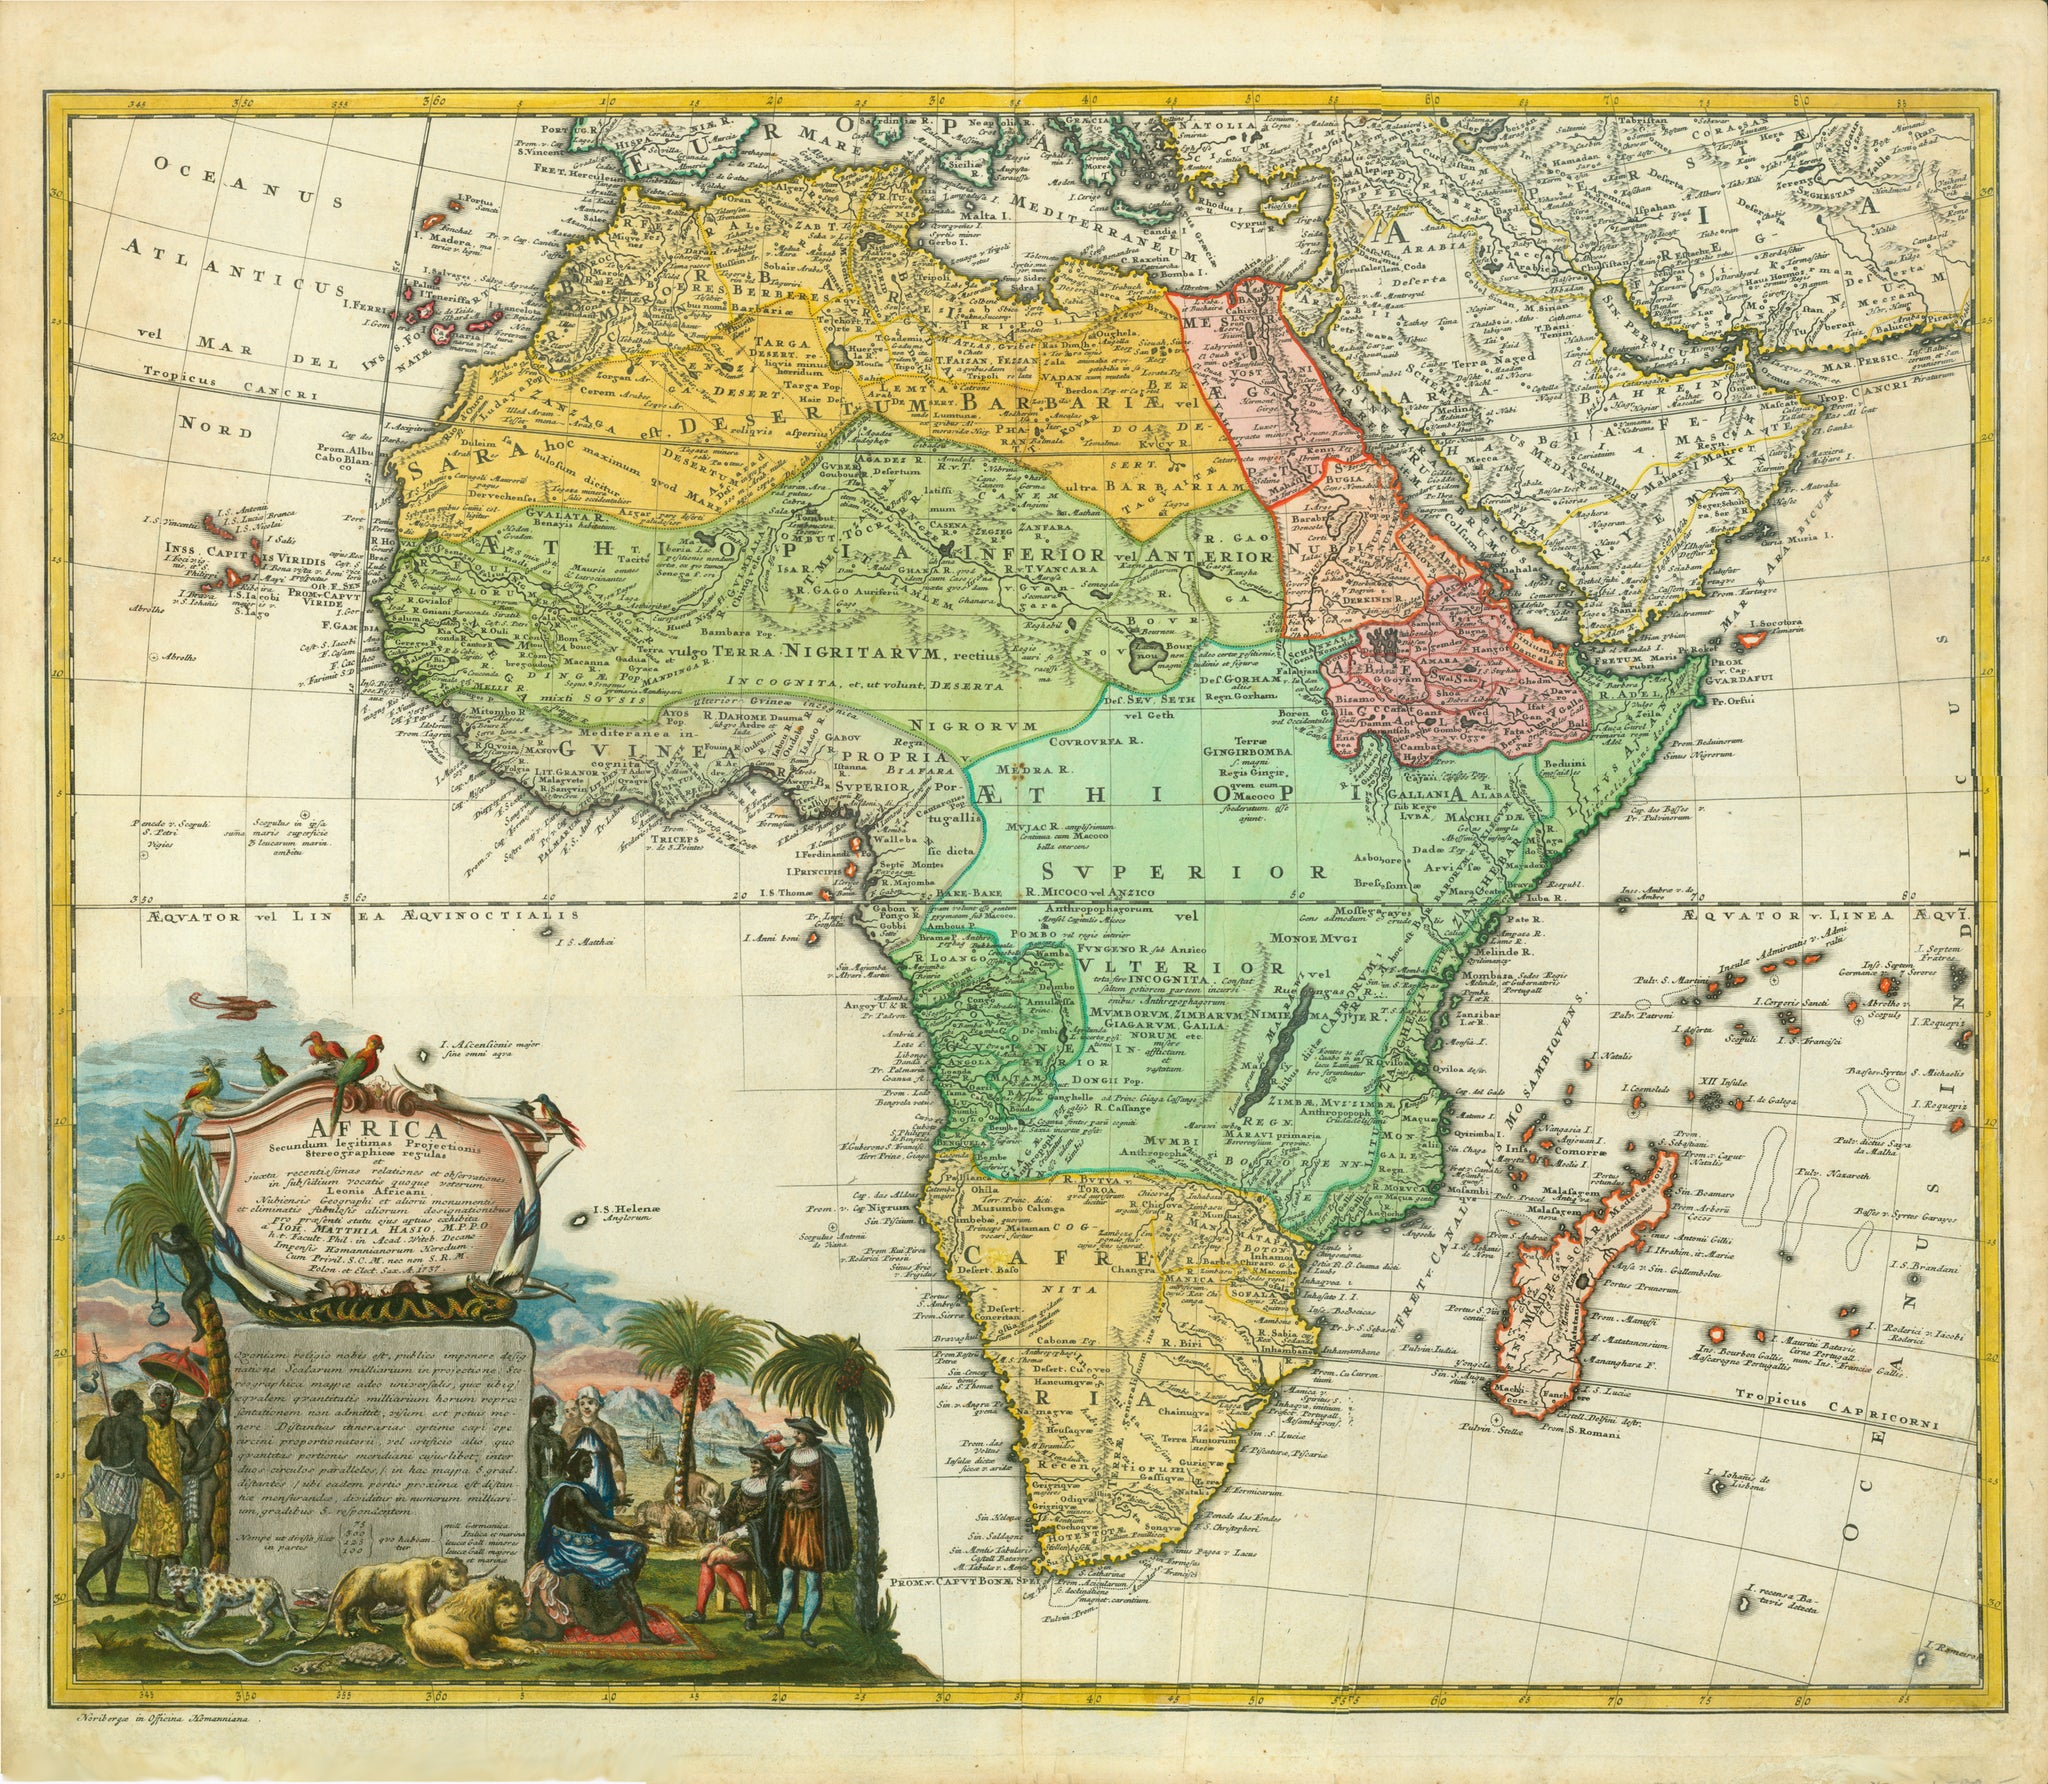 "Africa secundum legitimas Projectionis Stereograpficae....."  Fine copper engraving map with very exquisite original hand coloring.  The map is by Johann Matthias Hasius at Homann Heirs in Nuremberg ca 1740.  The cartouche is a real eye catcher showing splendid images of African peoples, animals and explorers.